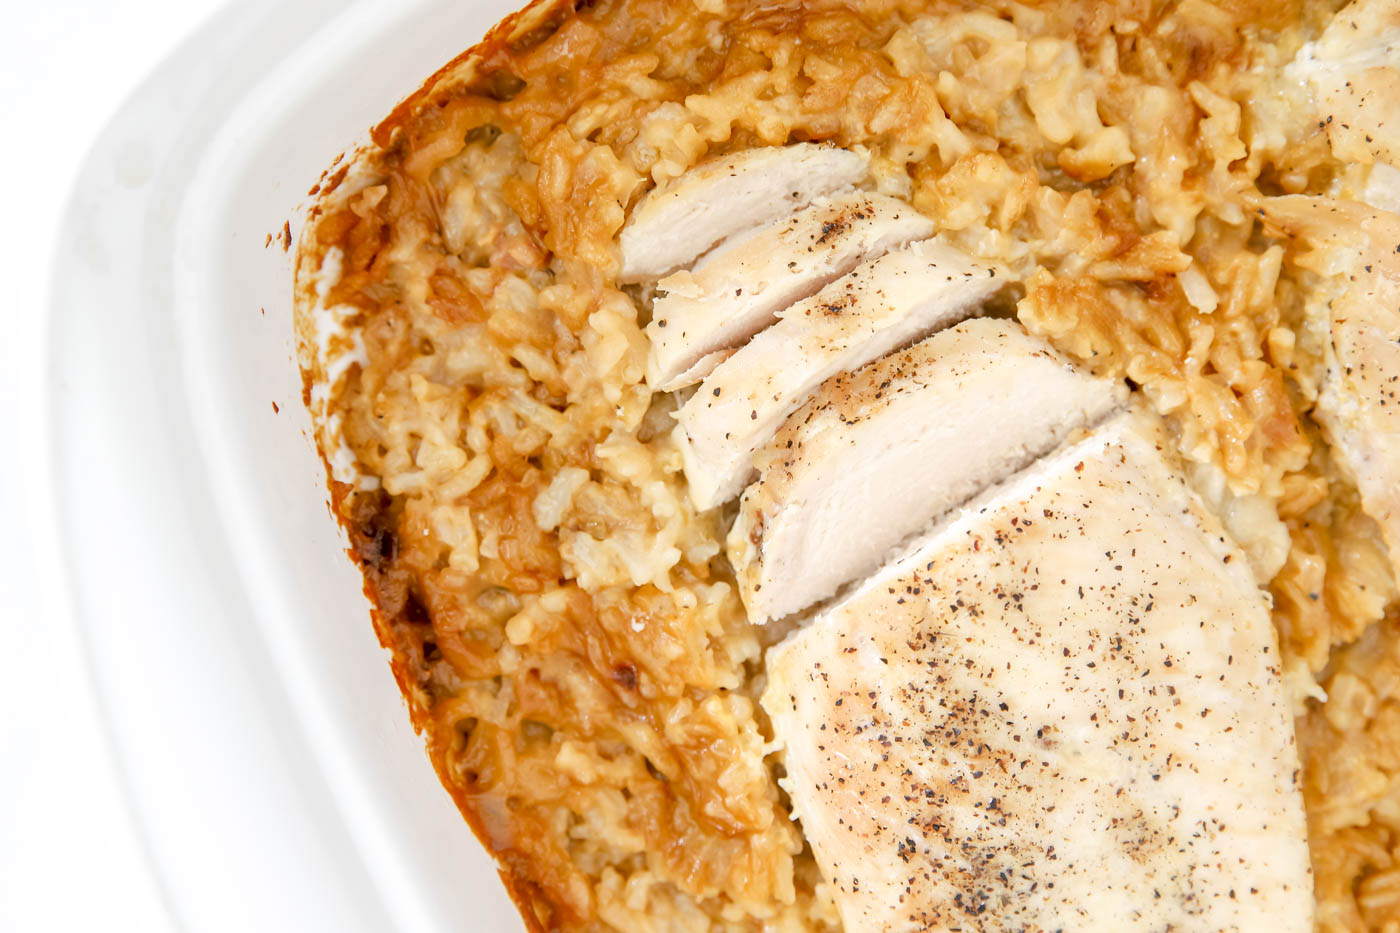 Savory & Easy Chicken and Rice